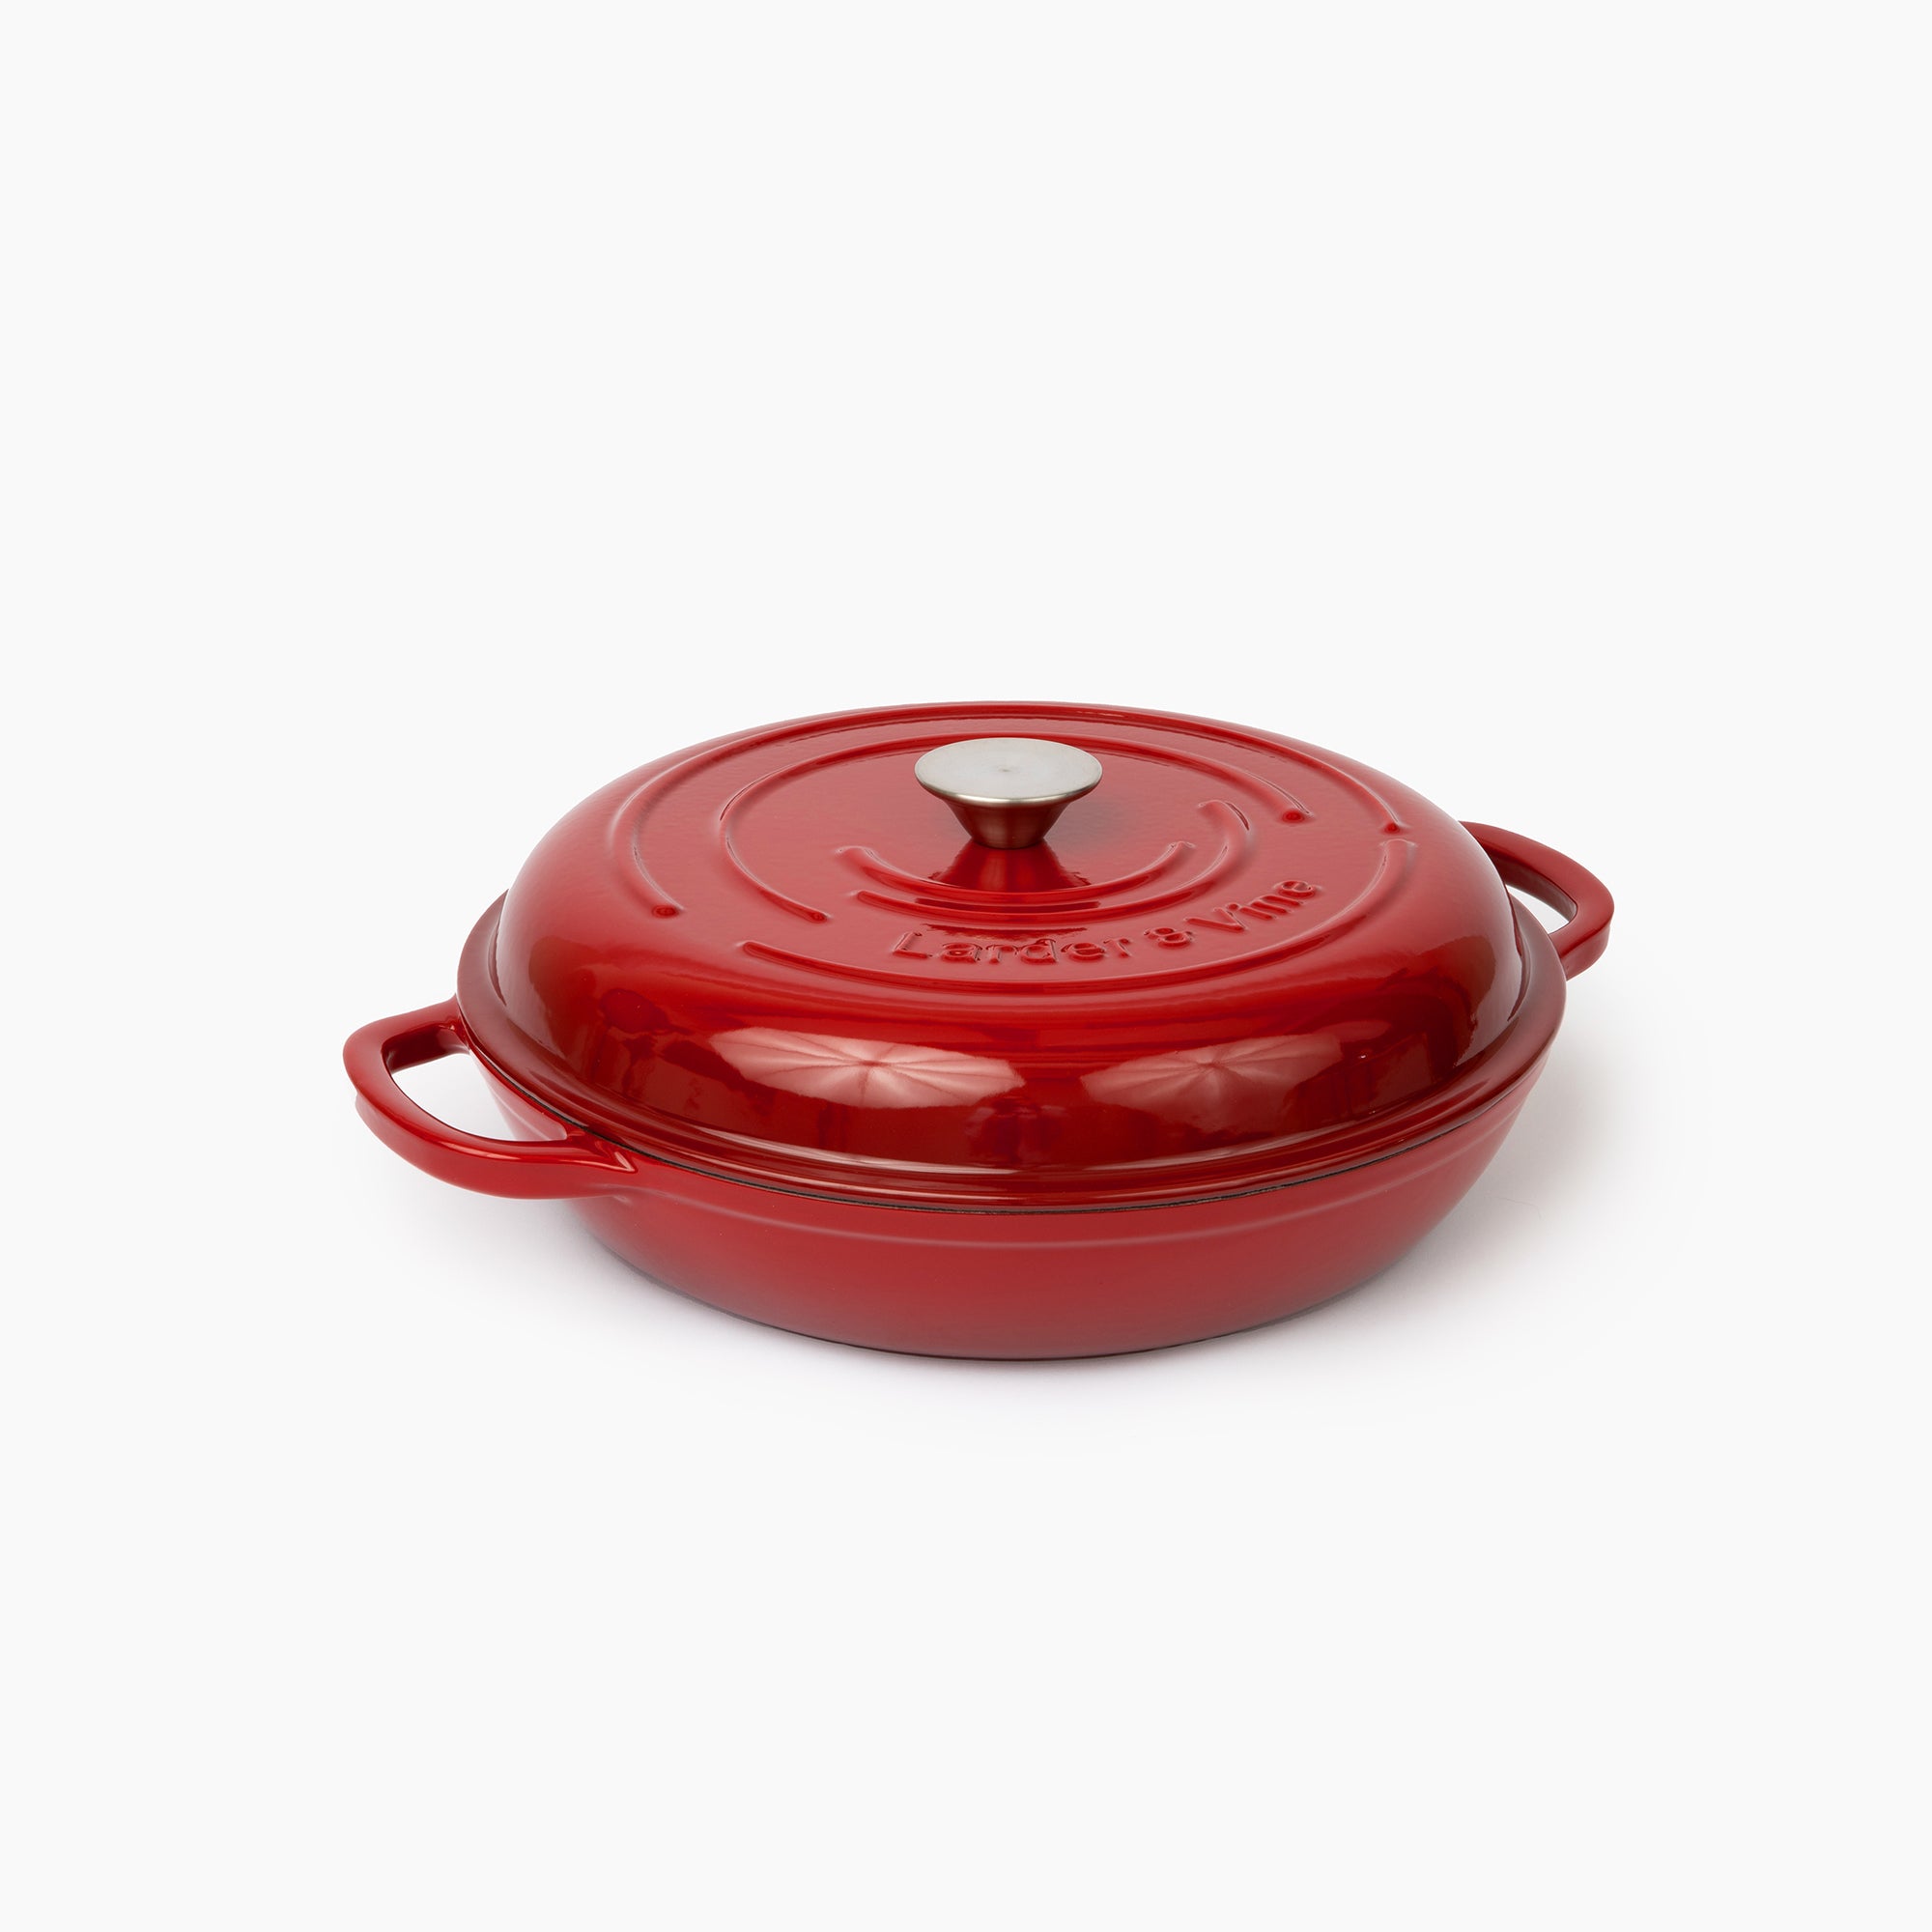 LAVA 6 Quart Enameled Cast Iron Braiser: Multipurpose Stylish Round Dutch  Oven Pot with Enameled White Interior and Trendy Lid (Red) 